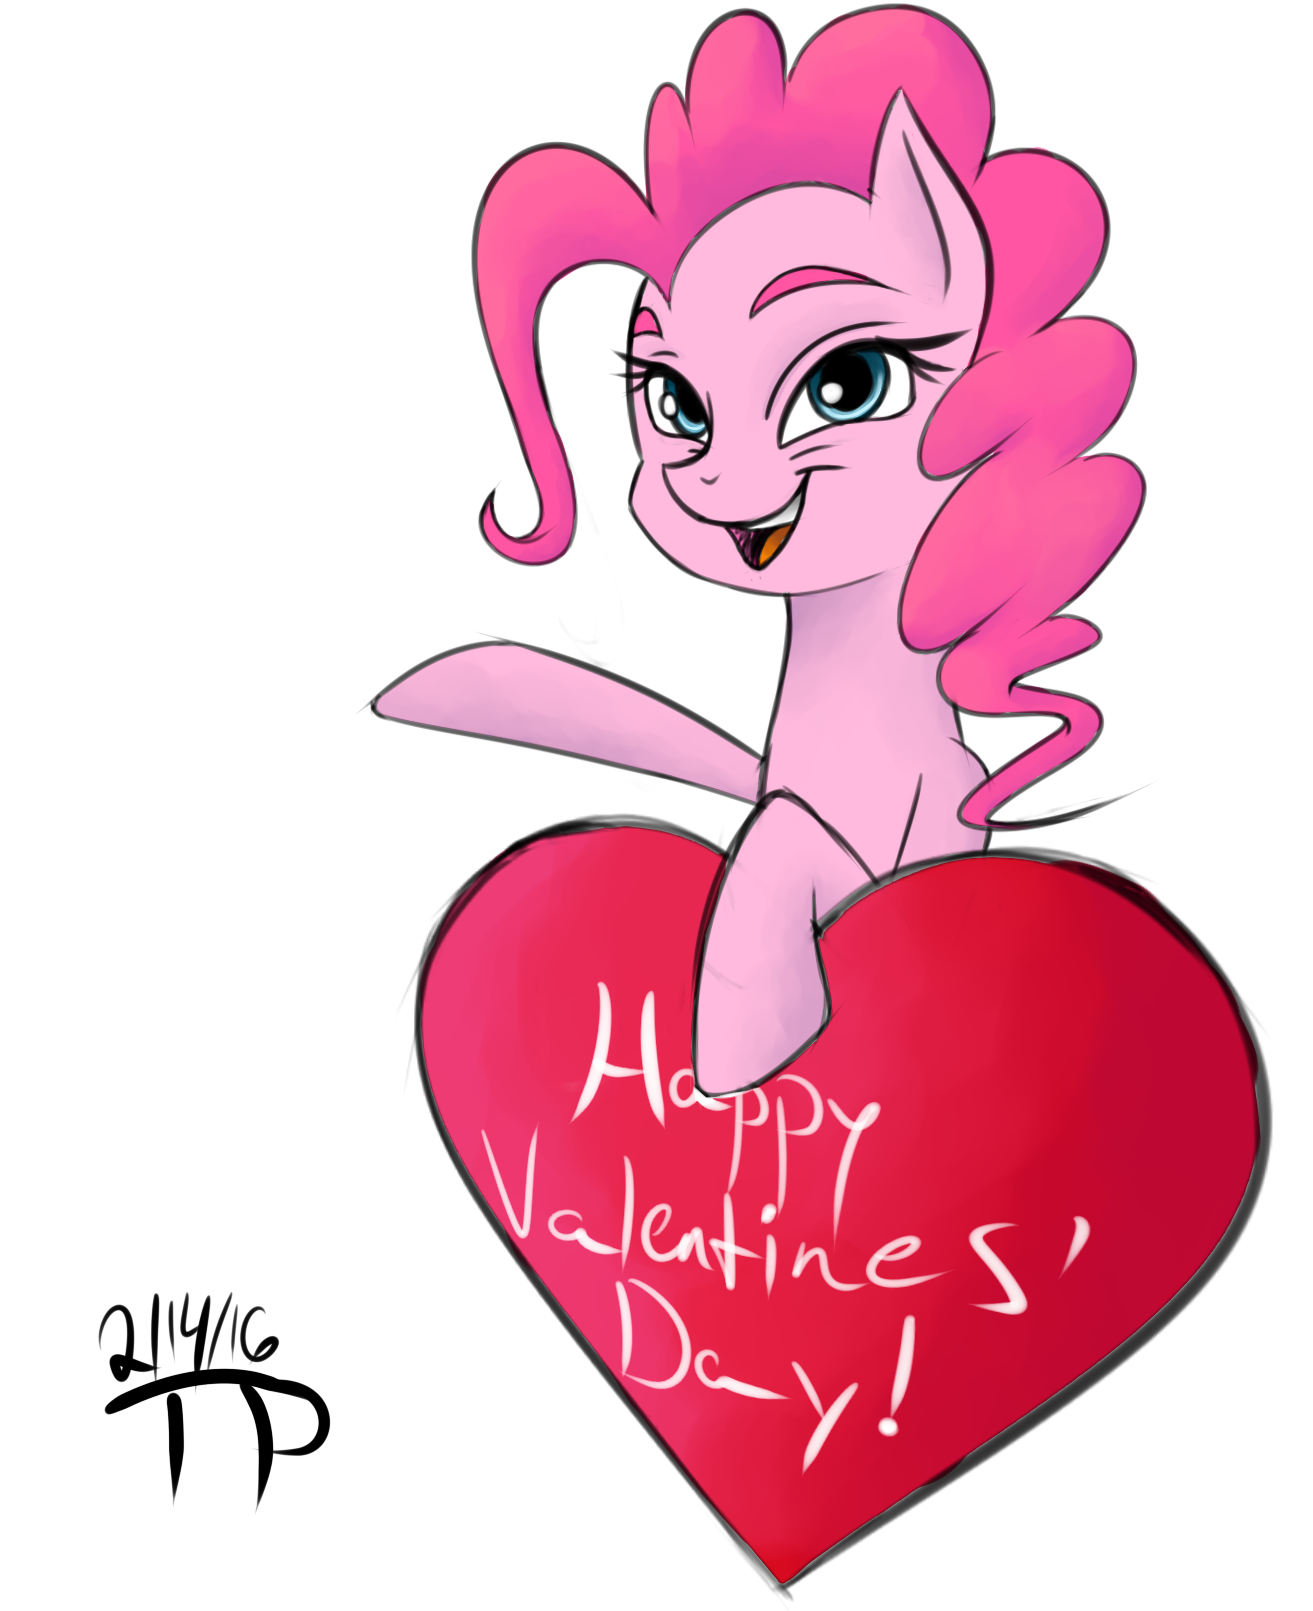 sig-4812833.happy_love_day_by_thethunder